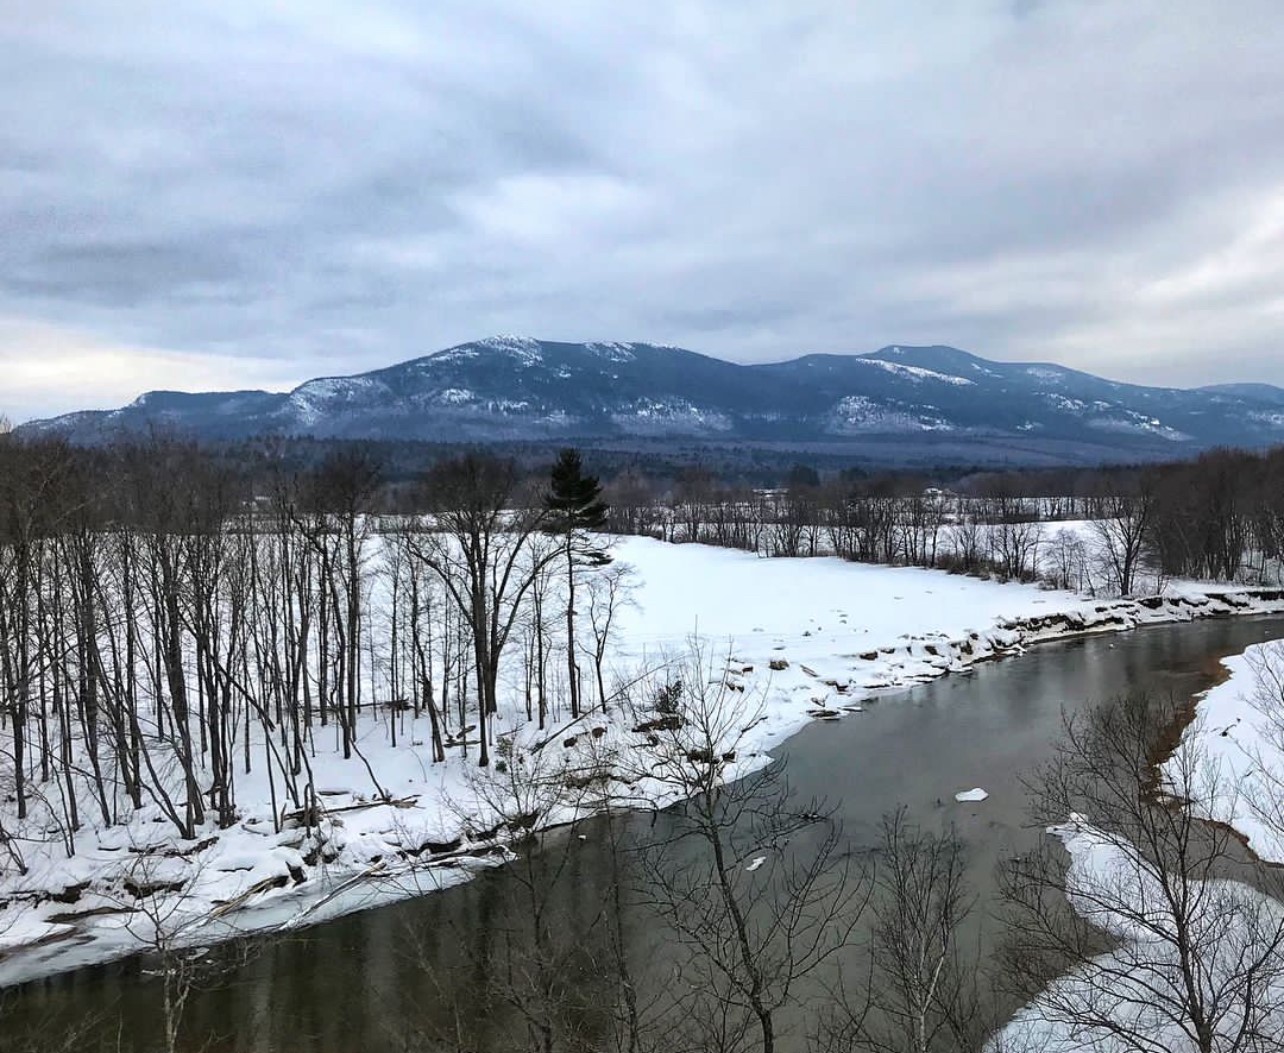 White Mountains, North Conway, NH in winter. Snow covered ground and river.